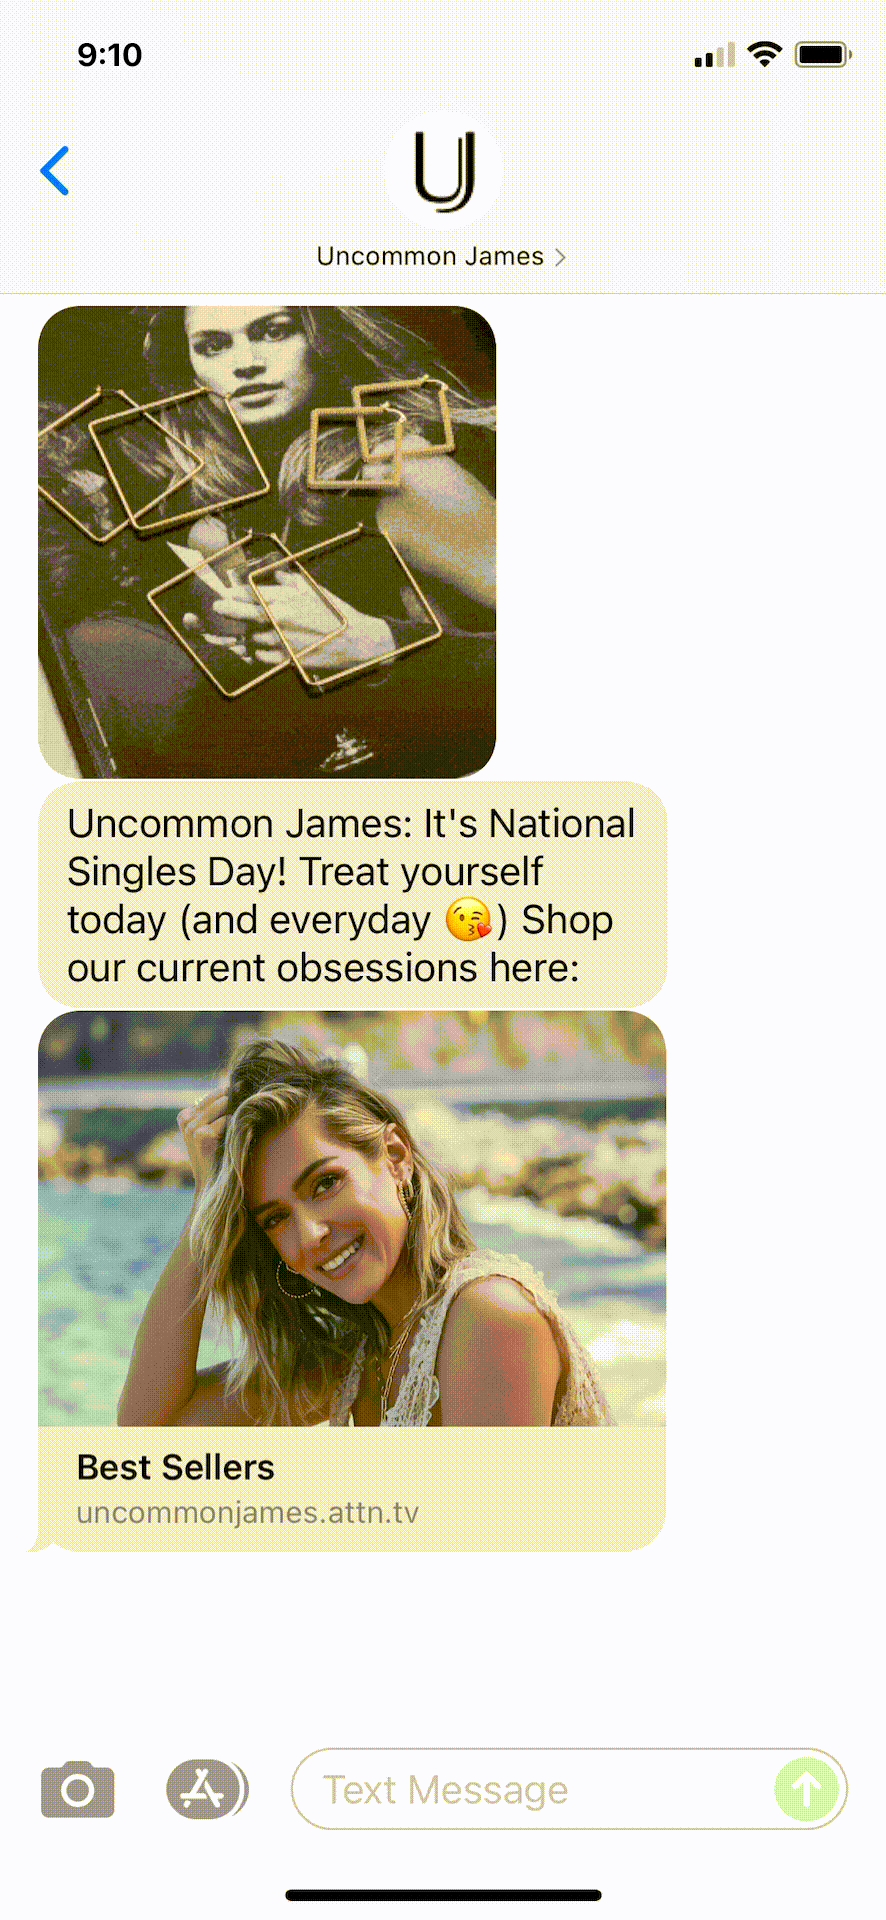 Uncommon-James-Text-Message-Marketing-Example-09.25.2021